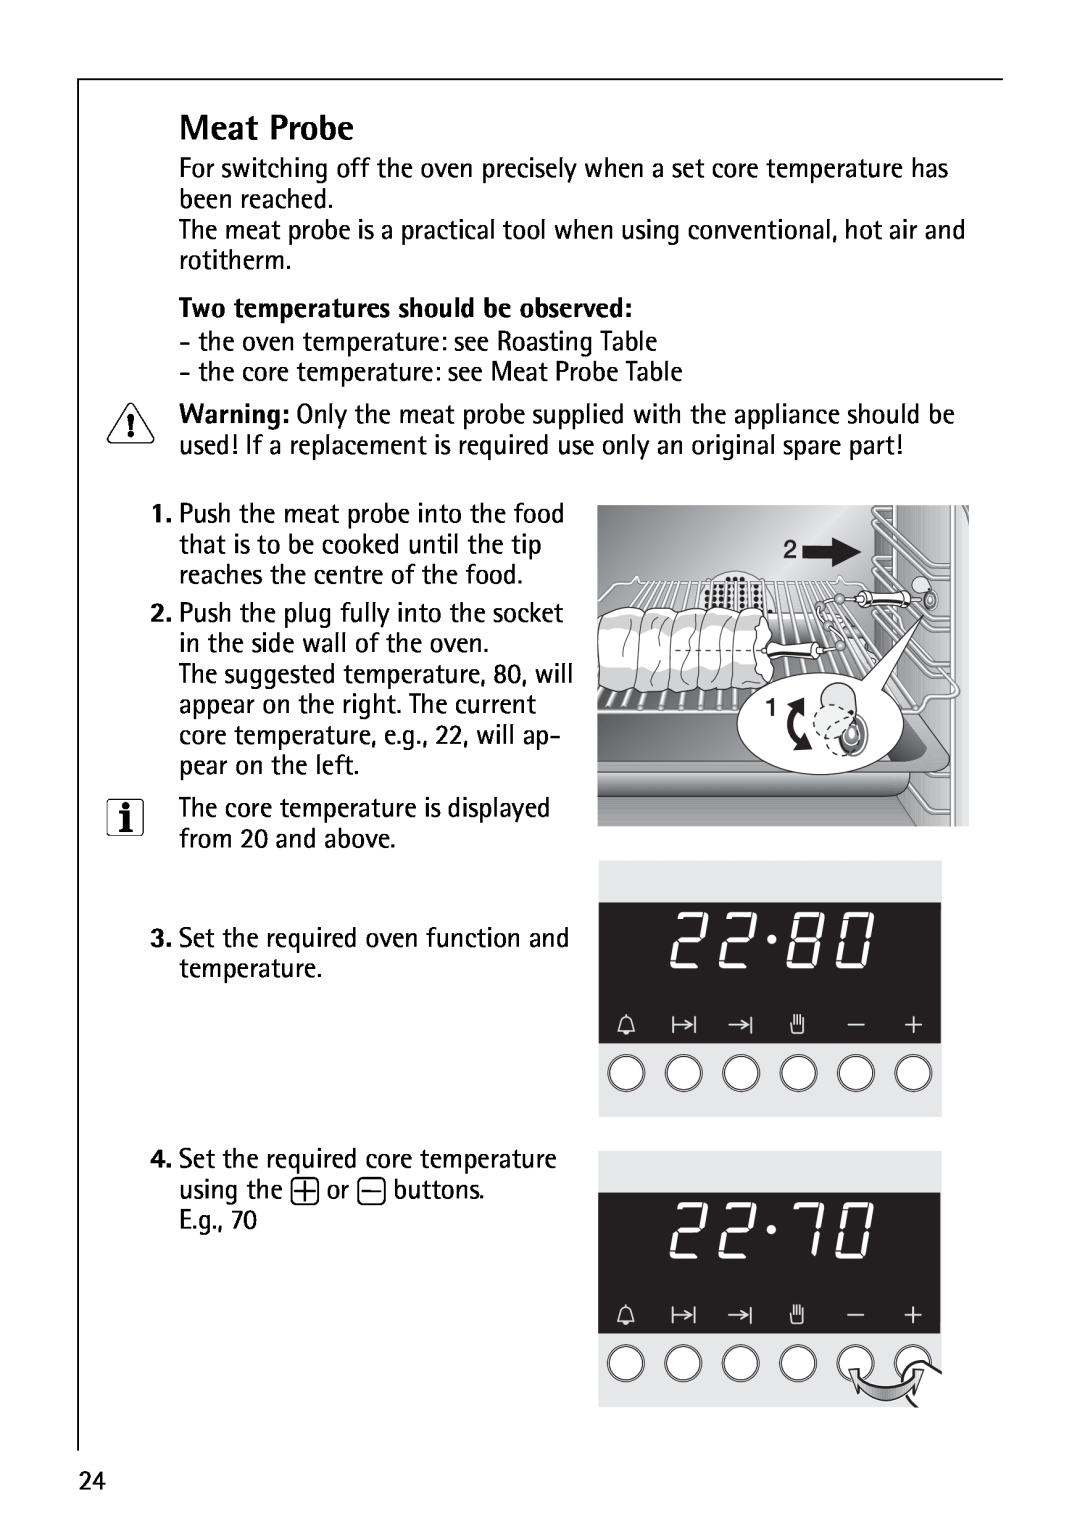 AEG B4130-1 operating instructions Meat Probe, Two temperatures should be observed 